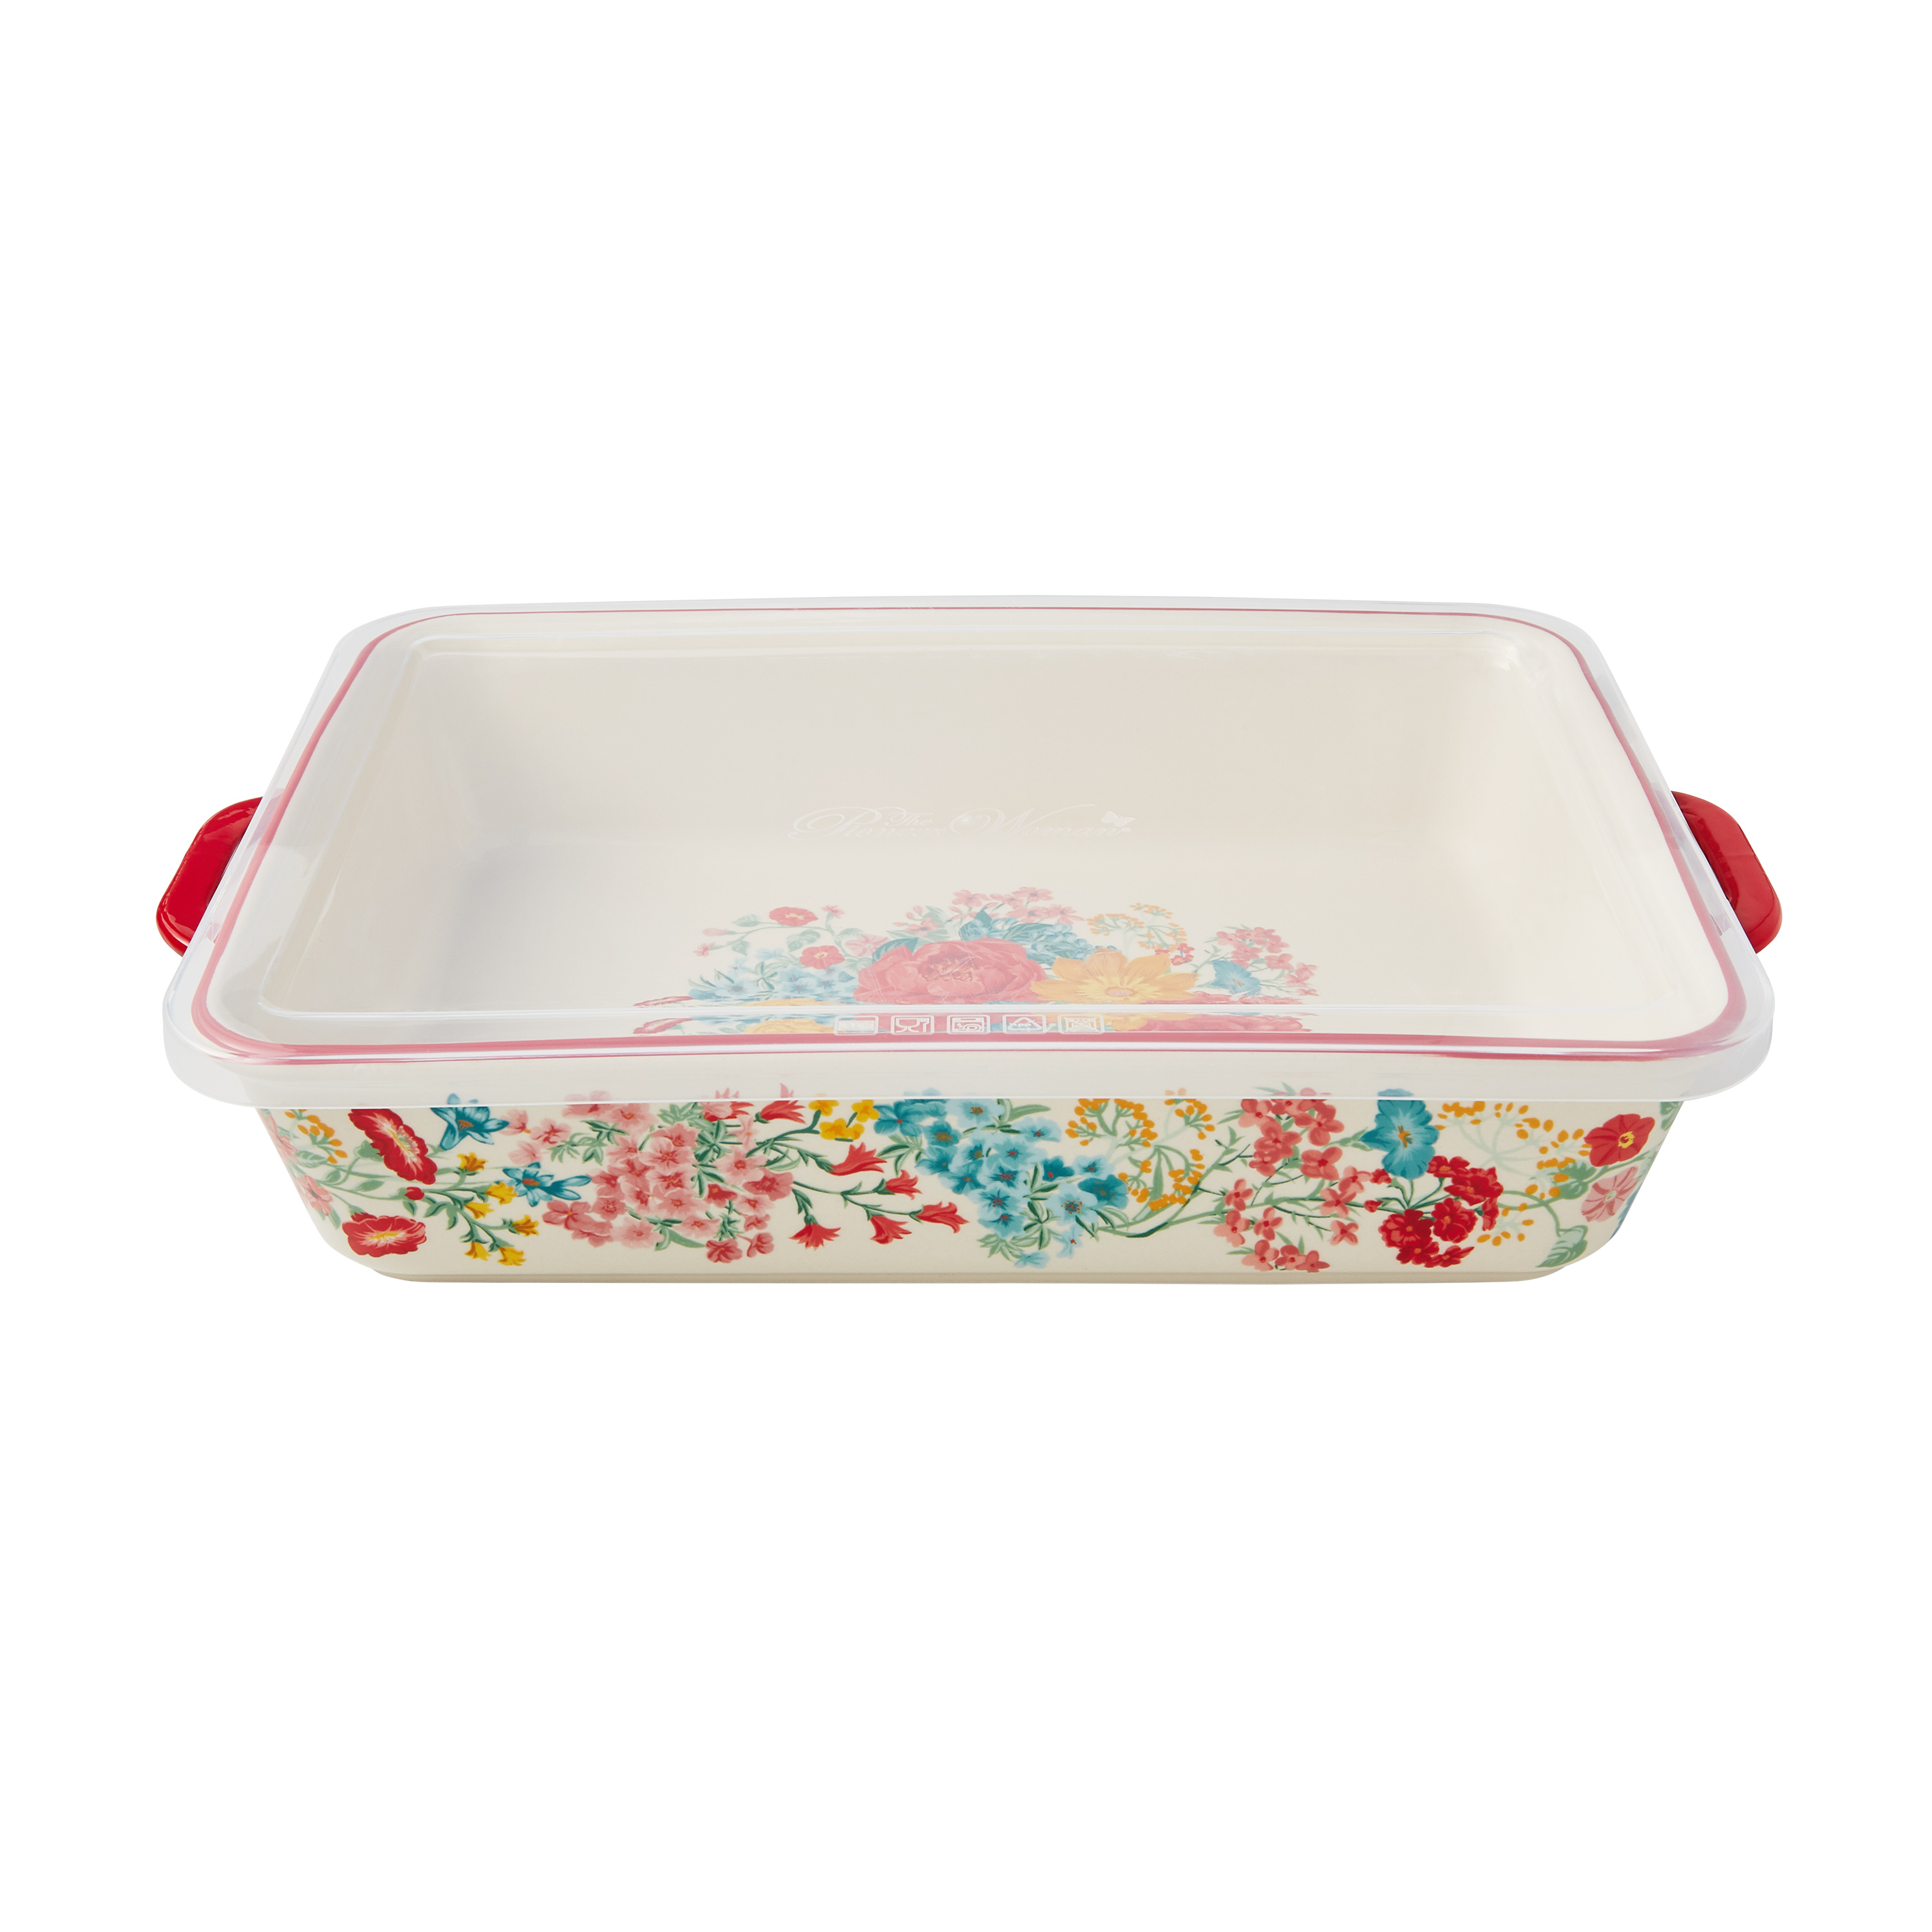 The Pioneer Woman Fancy Flourish 20-Piece Bake & Prep Set with Baking Dish & Measuring Cups - image 3 of 8